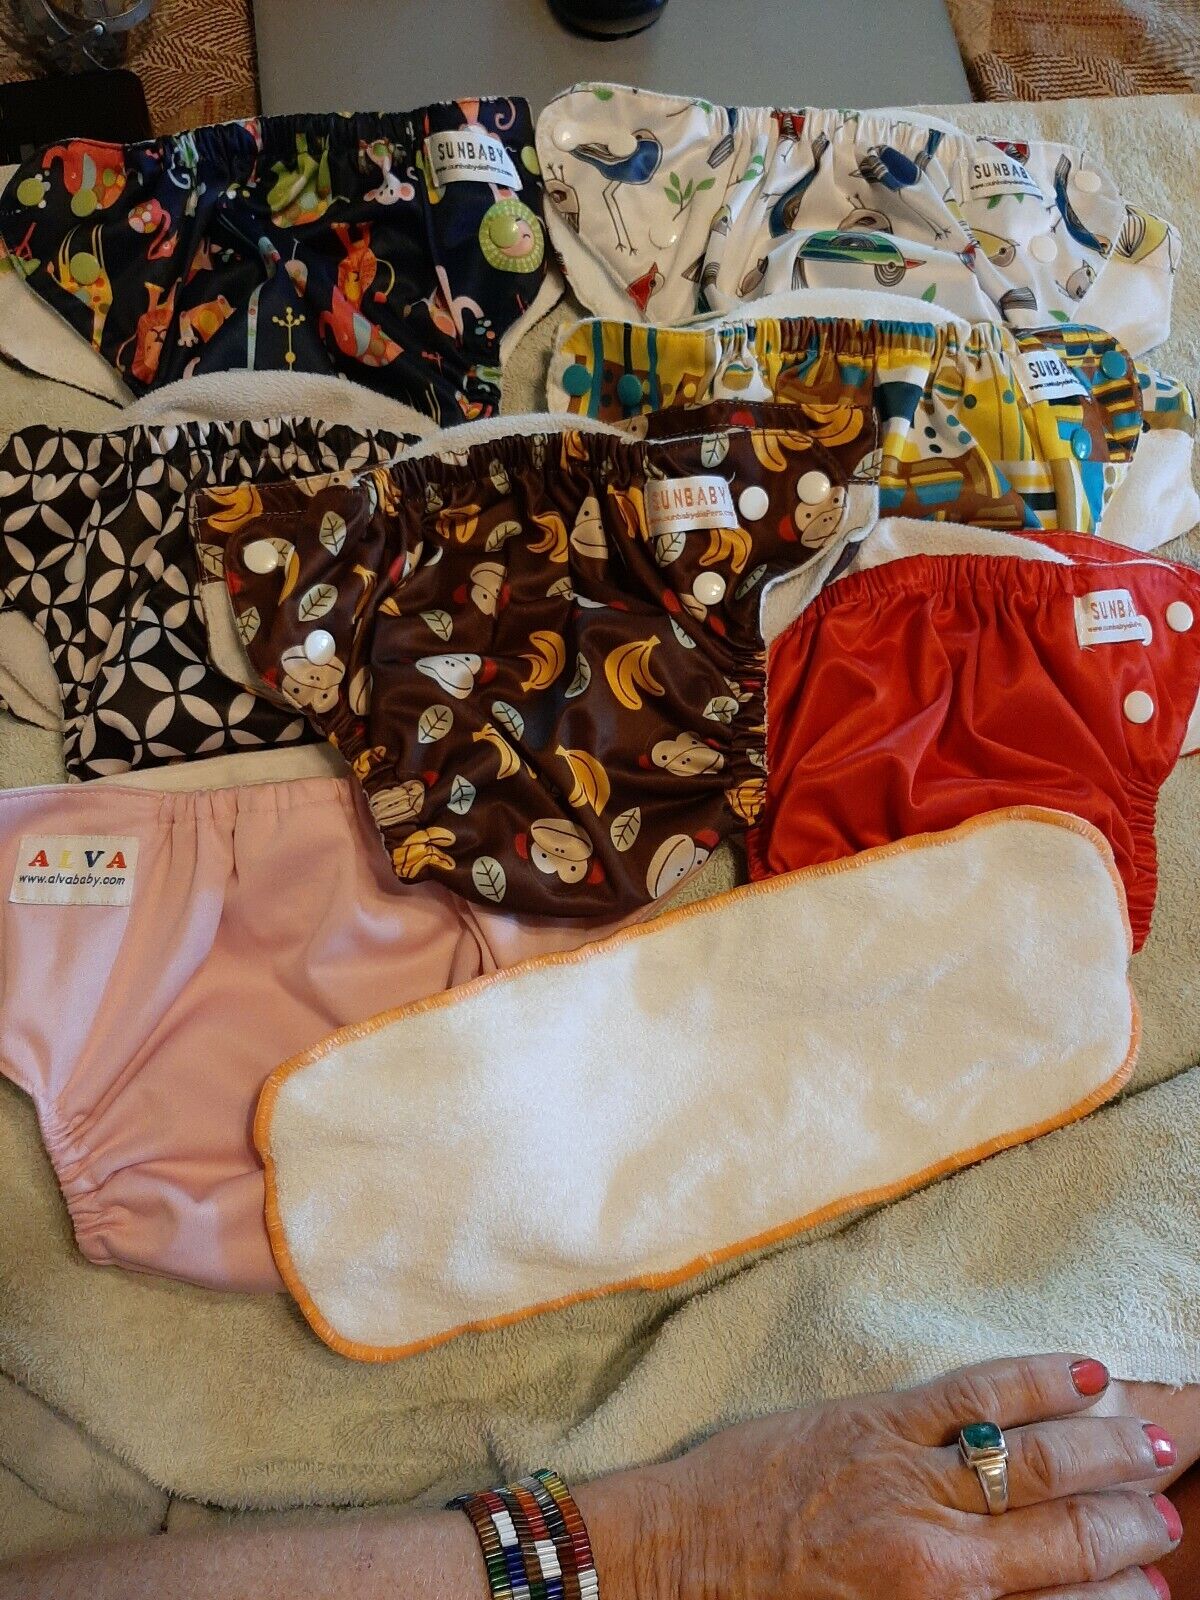 Lot 7 washable very nice Soft Sunbaby + Pocket Diapers w one Insert Lot #2 Sunbaby